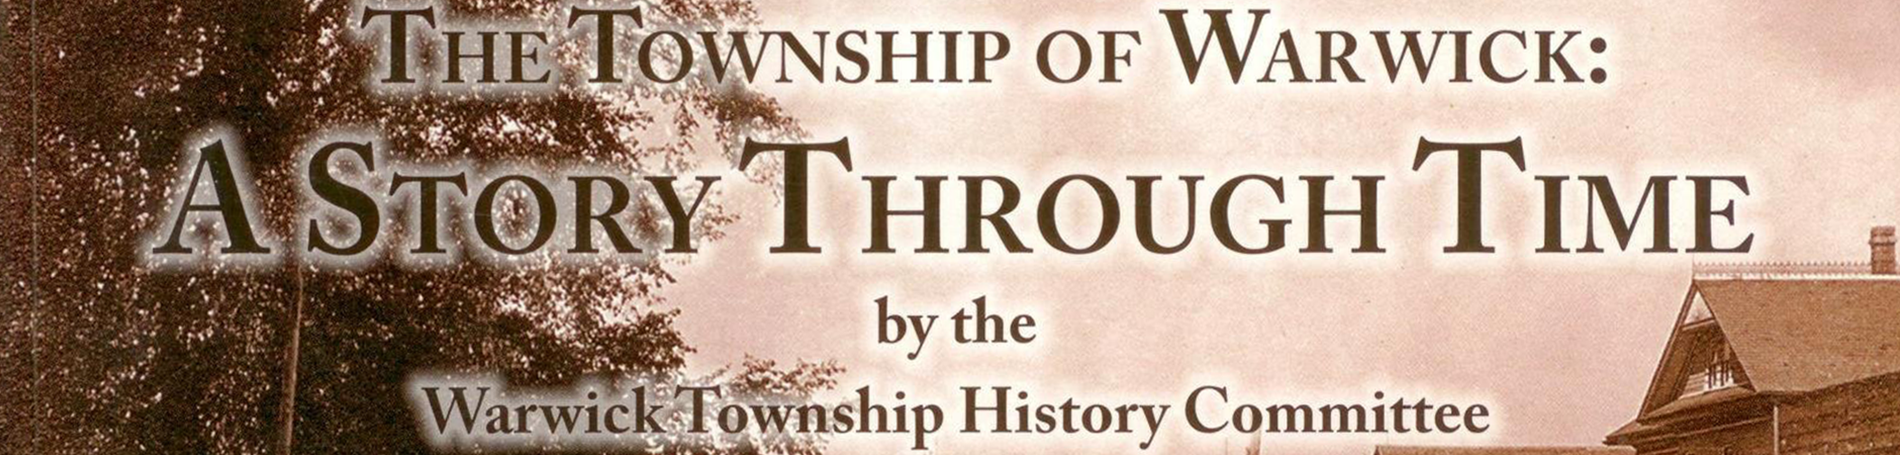 The Township of Warwick: A Story Through Time by the Warwick Township History Committee